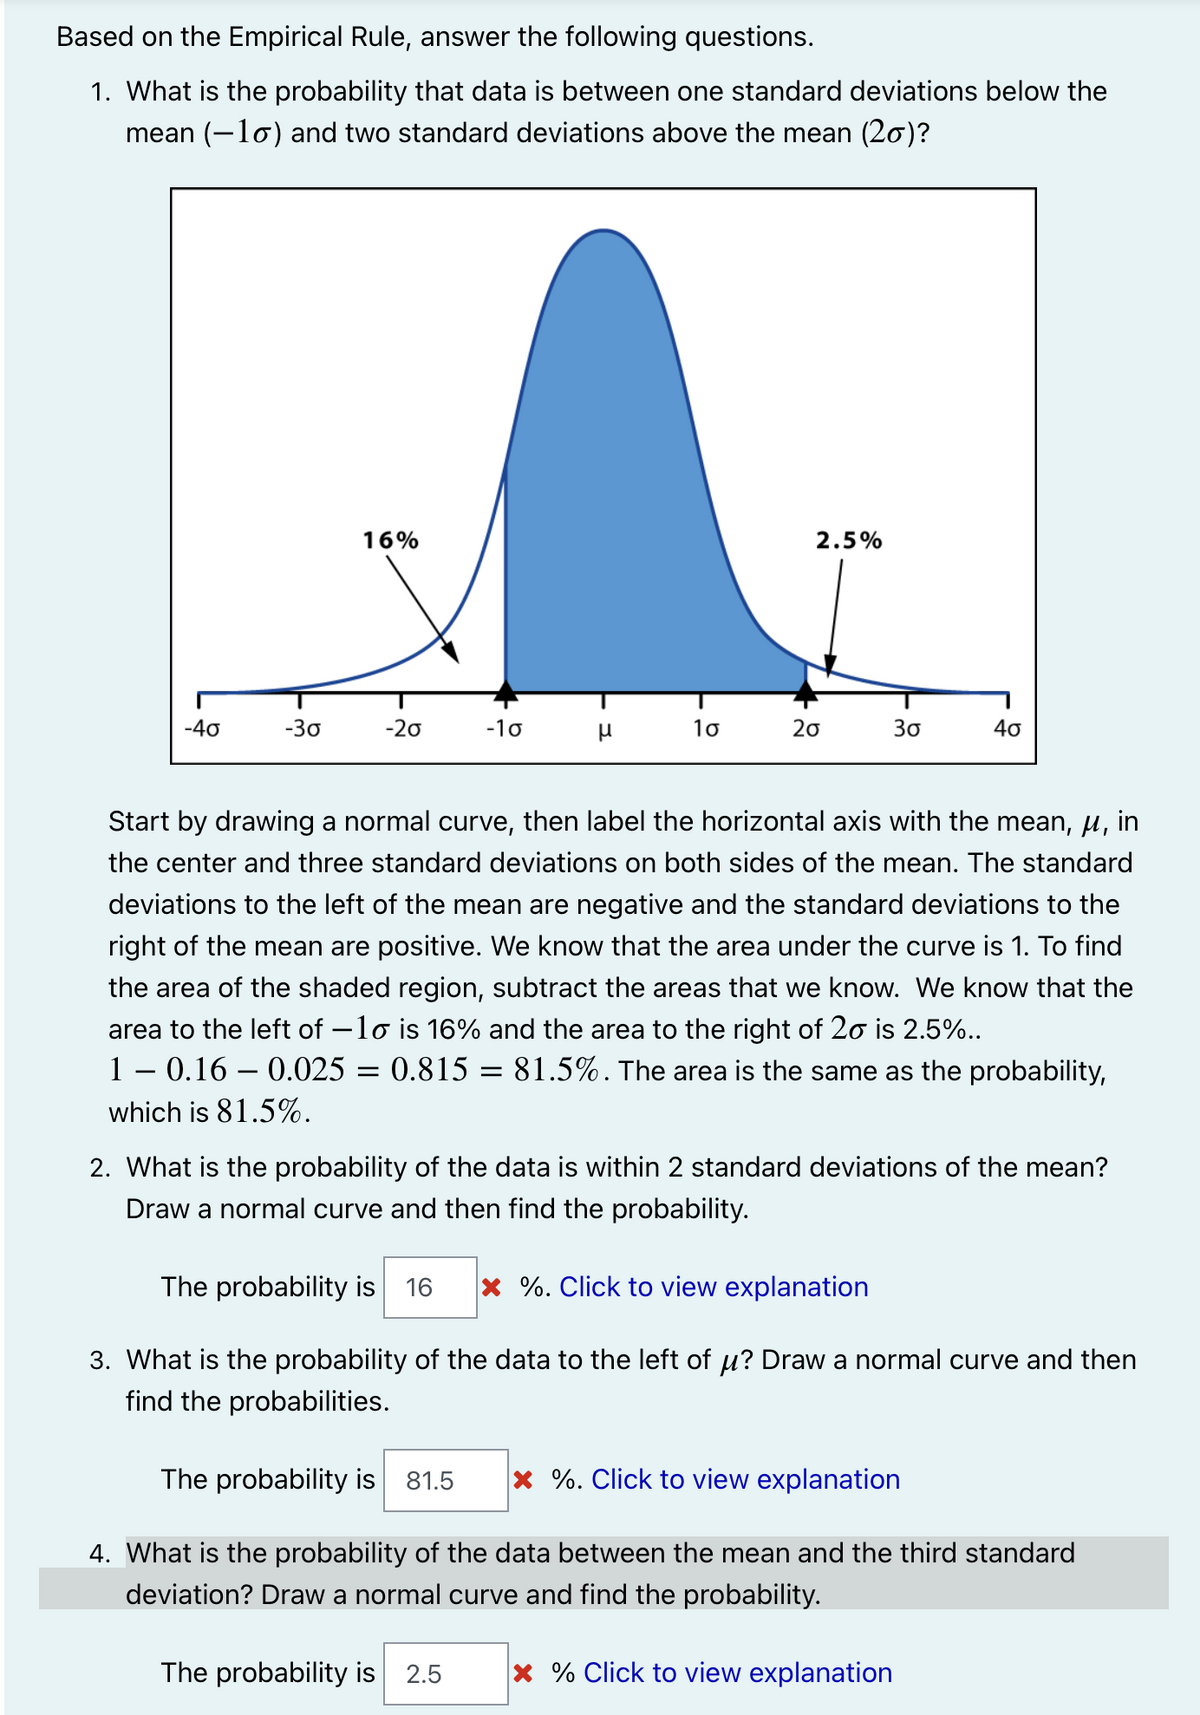 Based on the Empirical Rule, answer the following questions.
1. What is the probability that data is between one standard deviations below the
mean (-lo) and two standard deviations above the mean (20)?
16%
2.5%
-40
-30
-20
-10
10
20
30
40
Start by drawing a normal curve, then label the horizontal axis with the mean, u, in
the center and three standard deviations on both sides of the mean. The standard
deviations to the left of the mean are negative and the standard deviations to the
right of the mean are positive. We know that the area under the curve is 1. To find
the area of the shaded region, subtract the areas that we know. We know that the
area to the left of –lo is 16% and the area to the right of 20 is 2.5%..
1 – 0.16 – 0.025 = 0.815 = 81.5%. The area is the same as the probability,
which is 81.5%.
2. What is the probability of the data is within 2 standard deviations of the mean?
Draw a normal curve and then find the probability.
The probability is 16
× %. Click to view explanation
3. What is the probability of the data to the left of u? Draw a normal curve and then
find the probabilities.
The probability is 81.5
x %. Click to view explanation
4. What is the probability of the data between the mean and the third standard
deviation? Draw a normal curve and find the probability.
The probability is 2.5
x % Click to view explanation
